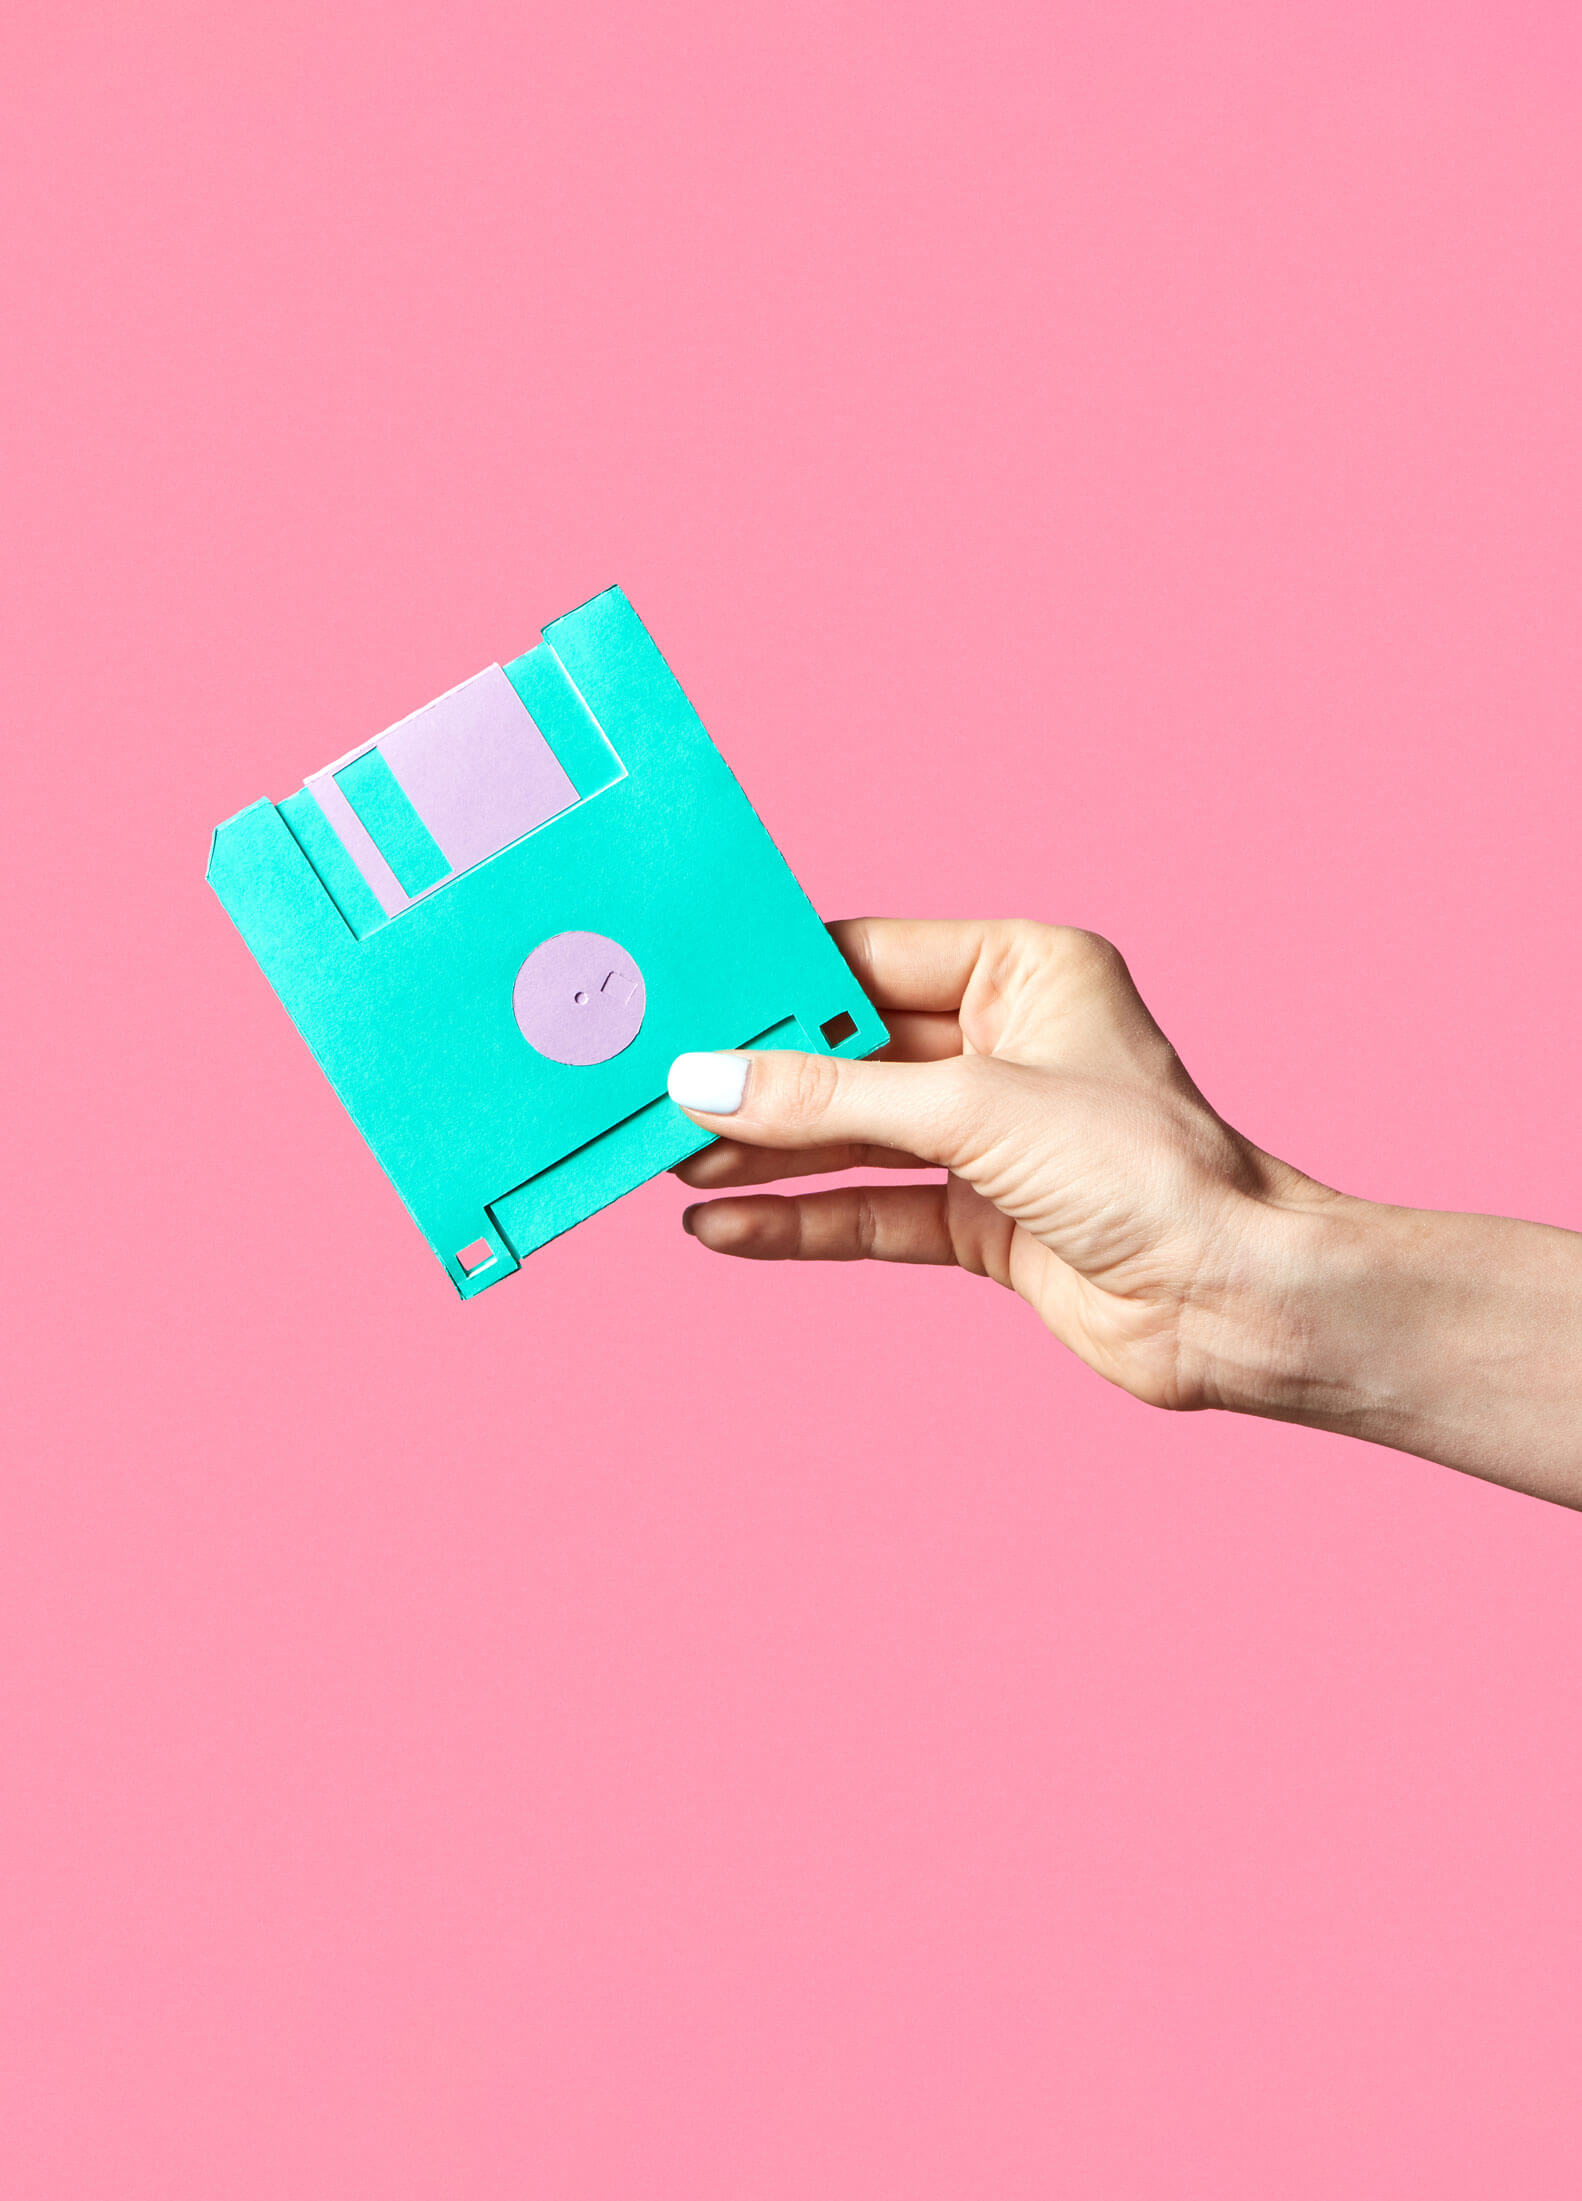 Isolated hand holding a floppy disk in front of a bright background